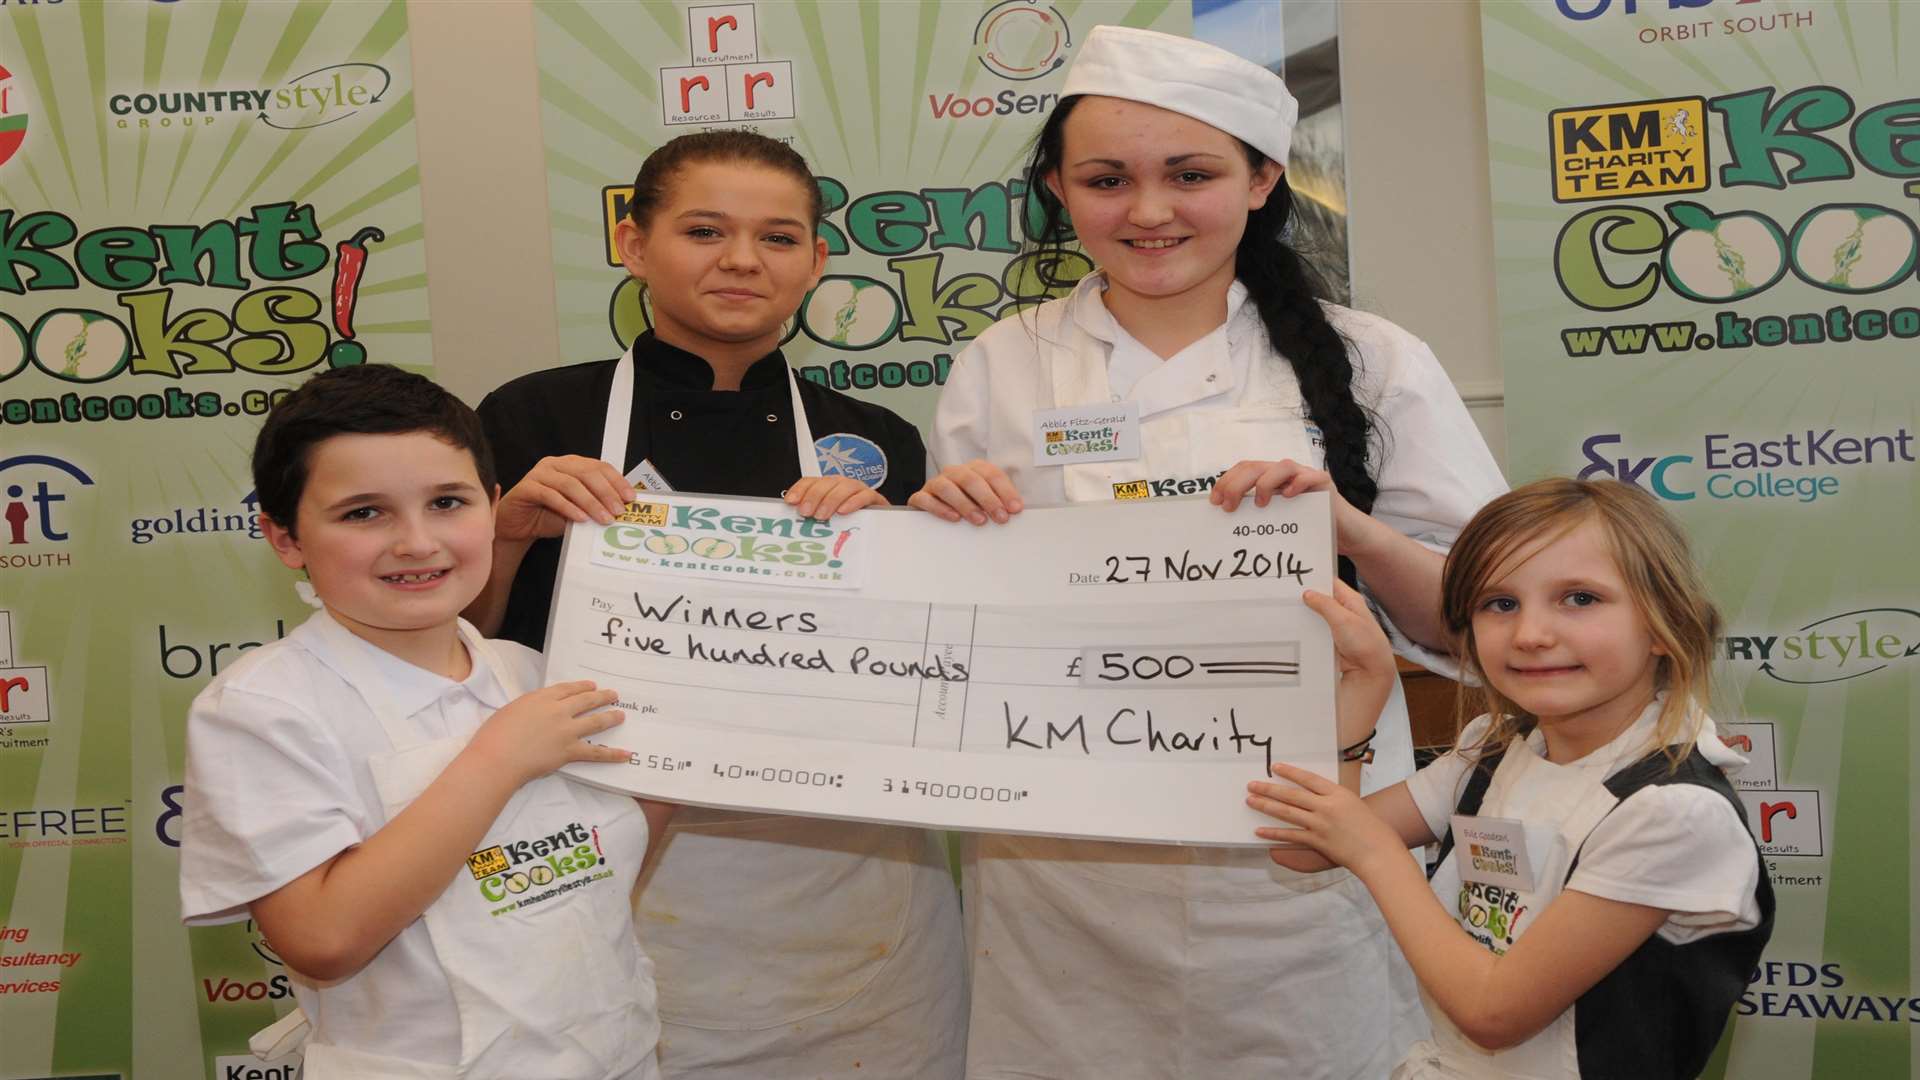 KM Kent Cooks winners will receive a share of £500.